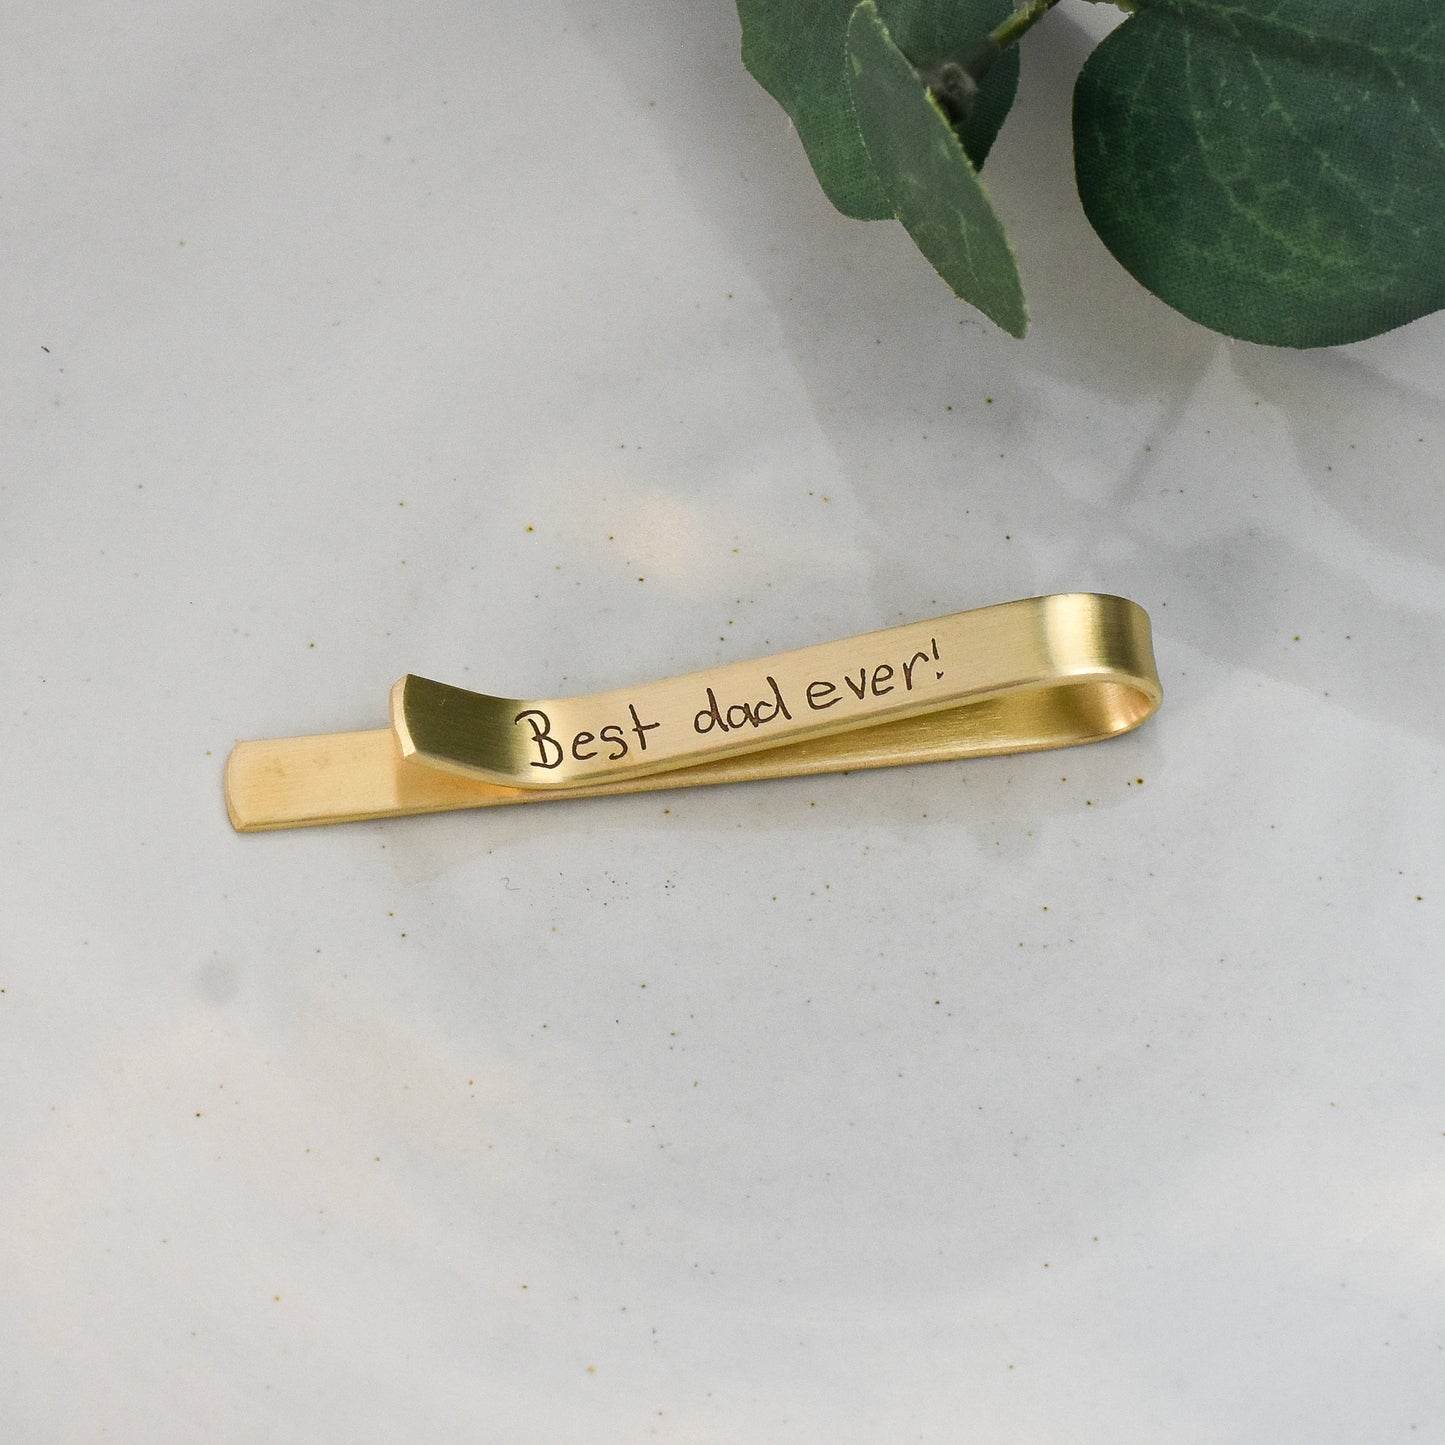 Custom engraved hand written message for dad on Father's Day engraved in gold brass.  Traditional tie accessory with personal touch.